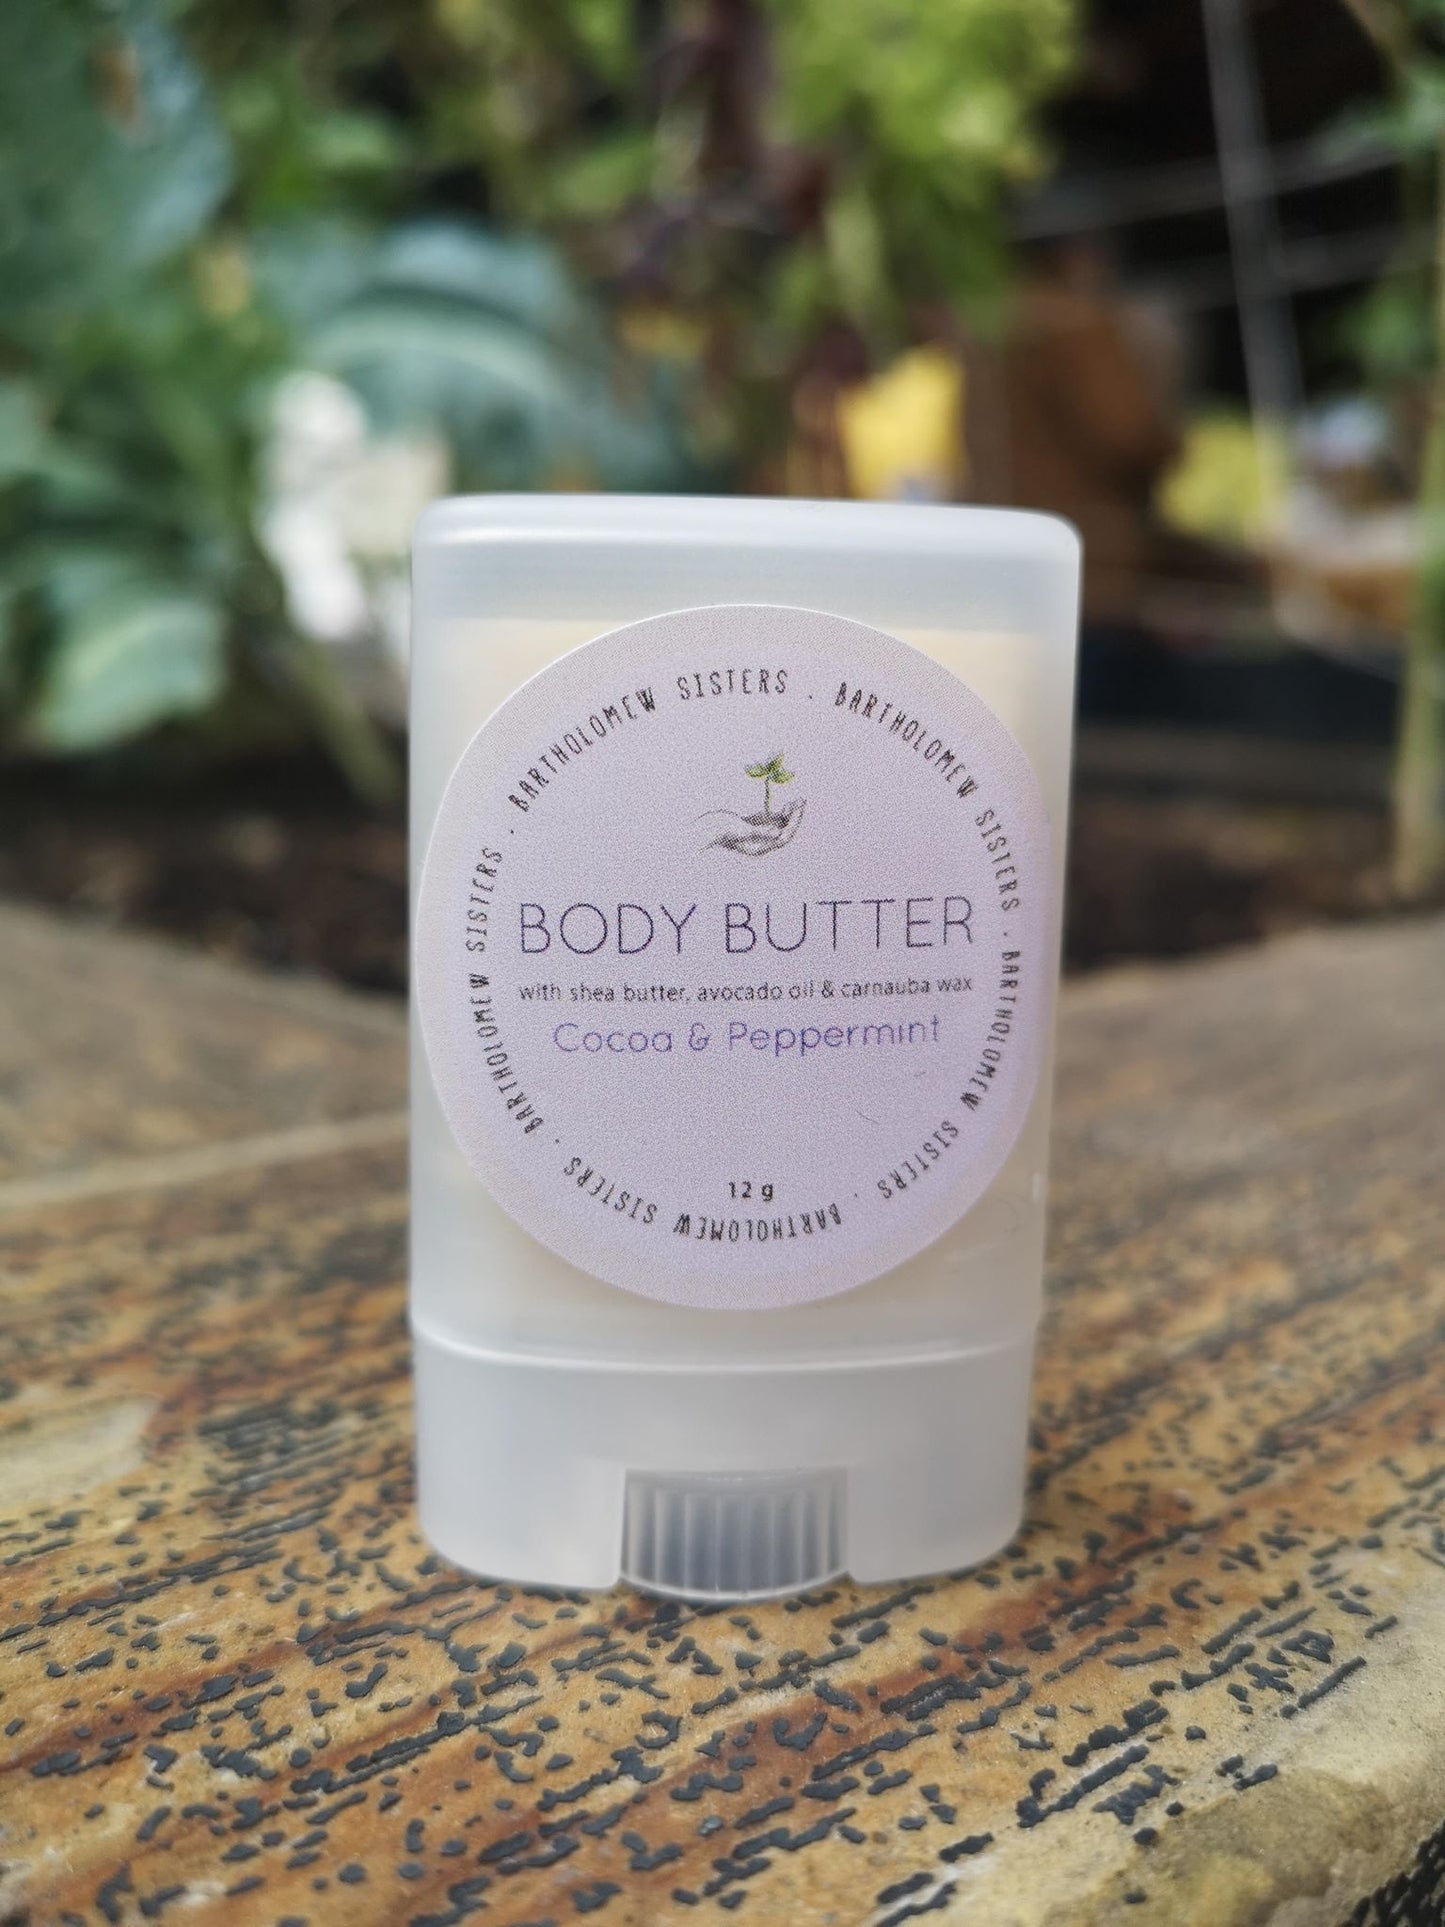 Chocolate peppermint body butter-0.4 oz